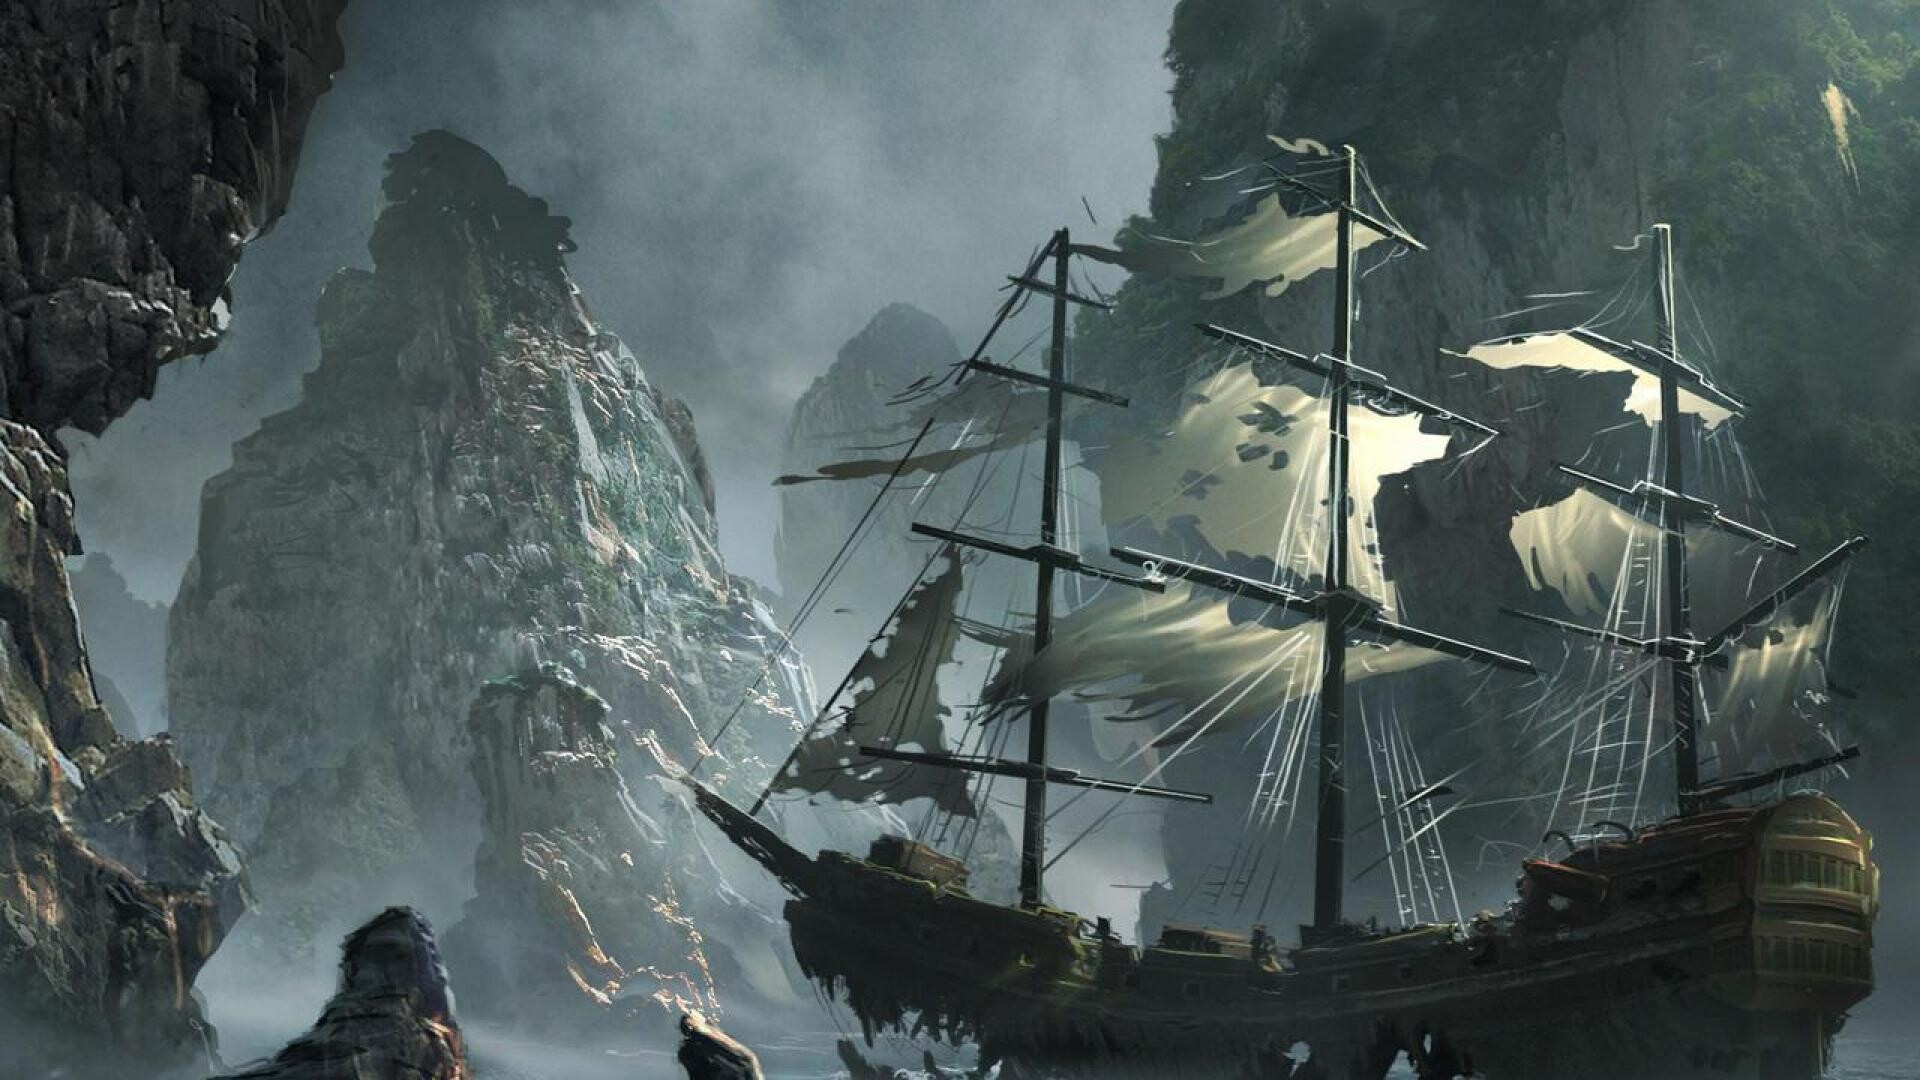 Ghost Ship: Vessels that are found with their crew missing or deceased. 1920x1080 Full HD Background.